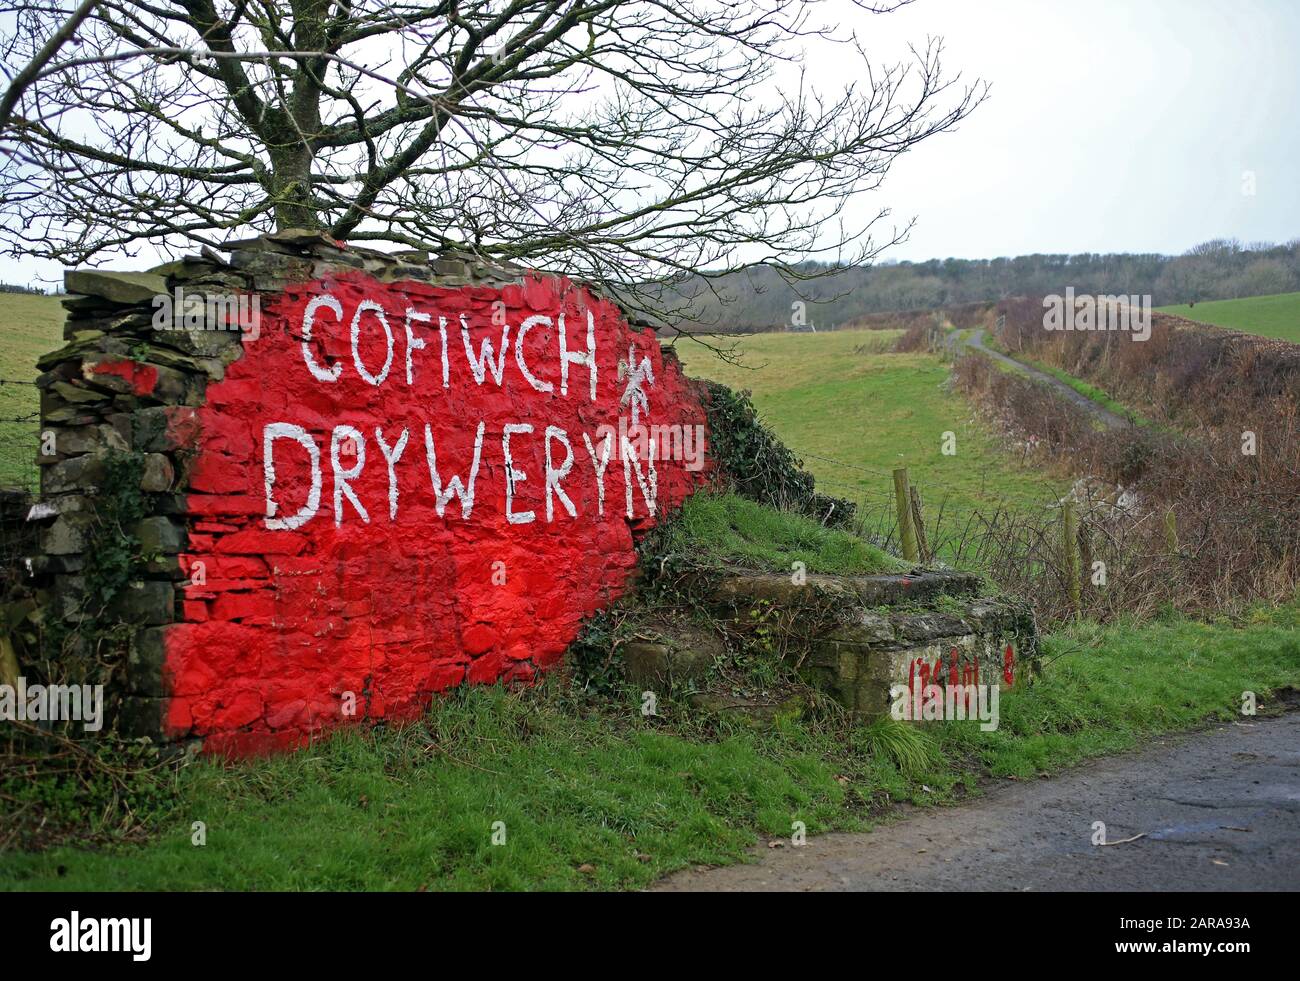 Llanrhystud, UK. 22nd Jan, 2020. On a stone wall near the Welsh seaside town is the saying 'Cofiwch Dryweryn' ('Remember Tryweryn'). 55 years ago, the Tryweryn Valley and its village were flooded to create a water reservoir for the English city of Liverpool. The protest slogan is now often found in Wales as a symbol of the independence movement. (to dpa-KORR.: 'Brexite meets British poorhouse Wales right in the heart' of 26.01.2020) Credit: Susannah Ireland/dpa/Alamy Live News Stock Photo